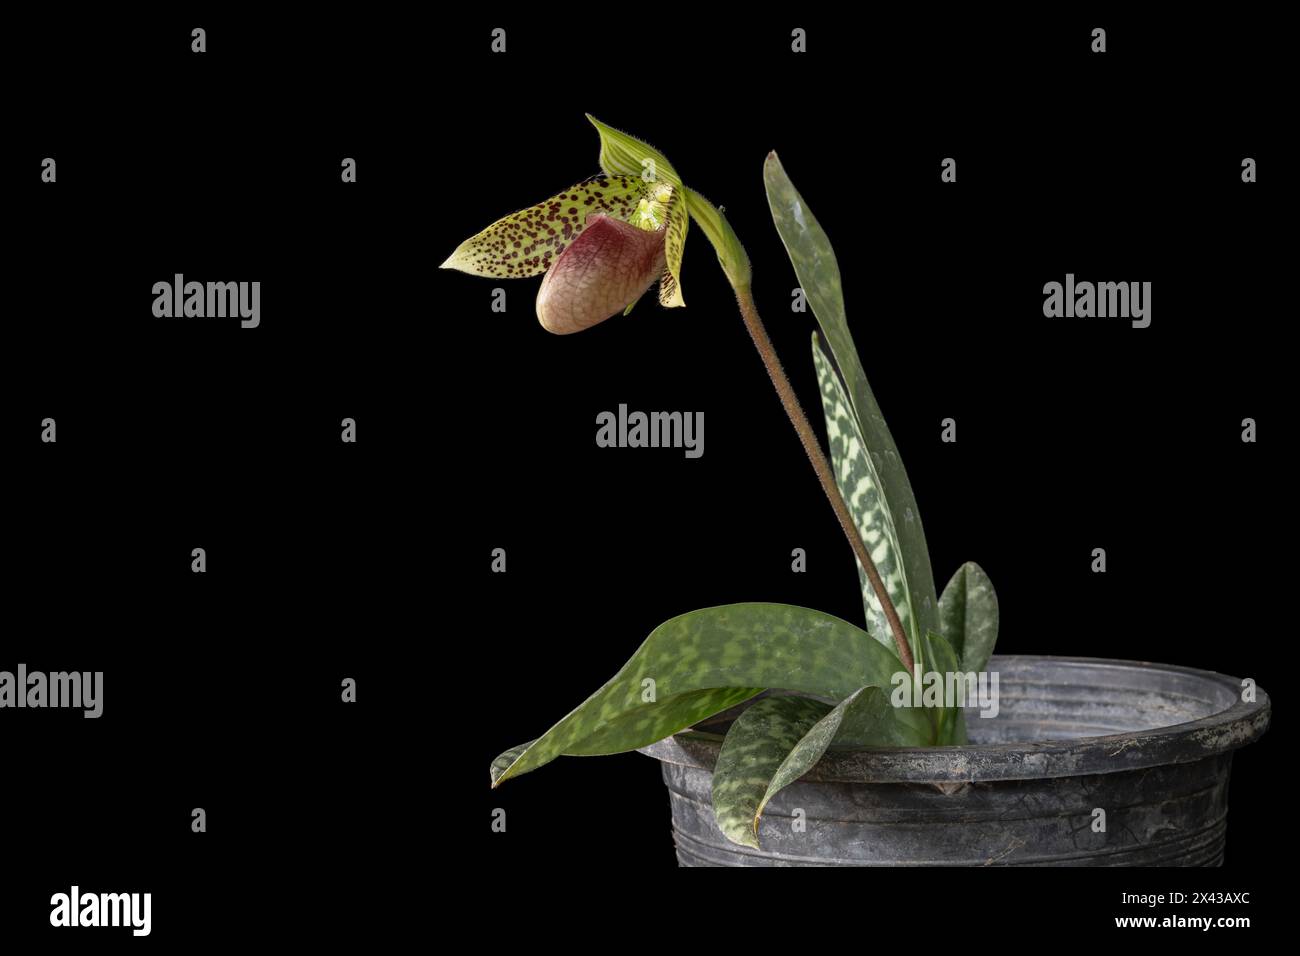 Closeup view of blooming lady slipper orchid species paphiopedilum sukhakulii with purple red and green flower isolated on black background Stock Photo